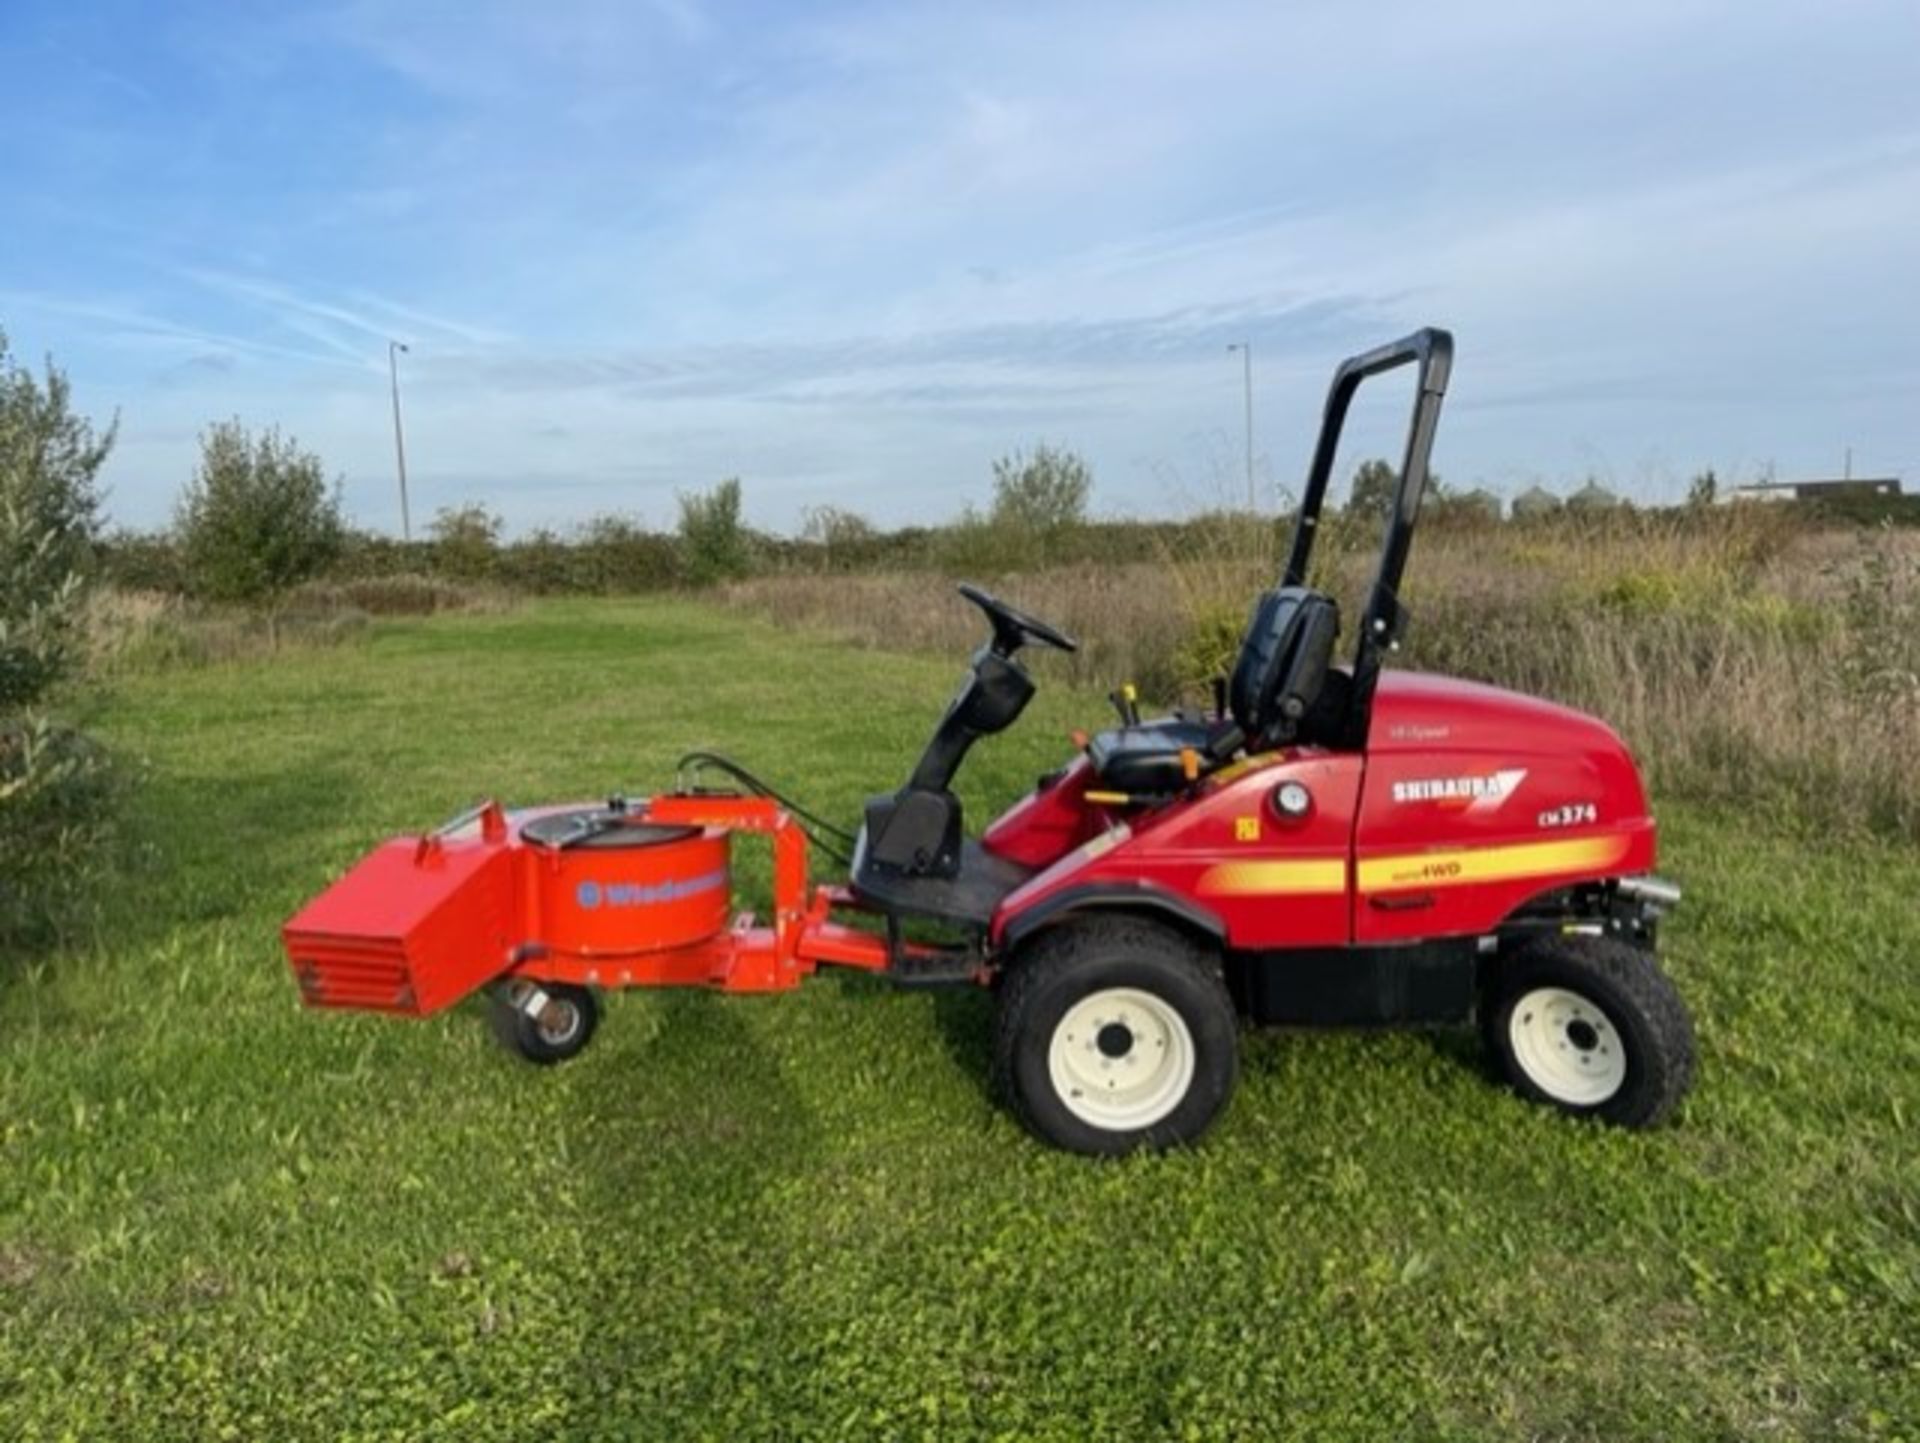 2018, SHIBAURA CM374 OUTFRONT MOWER WITH DECK & BLOWER - Image 4 of 13